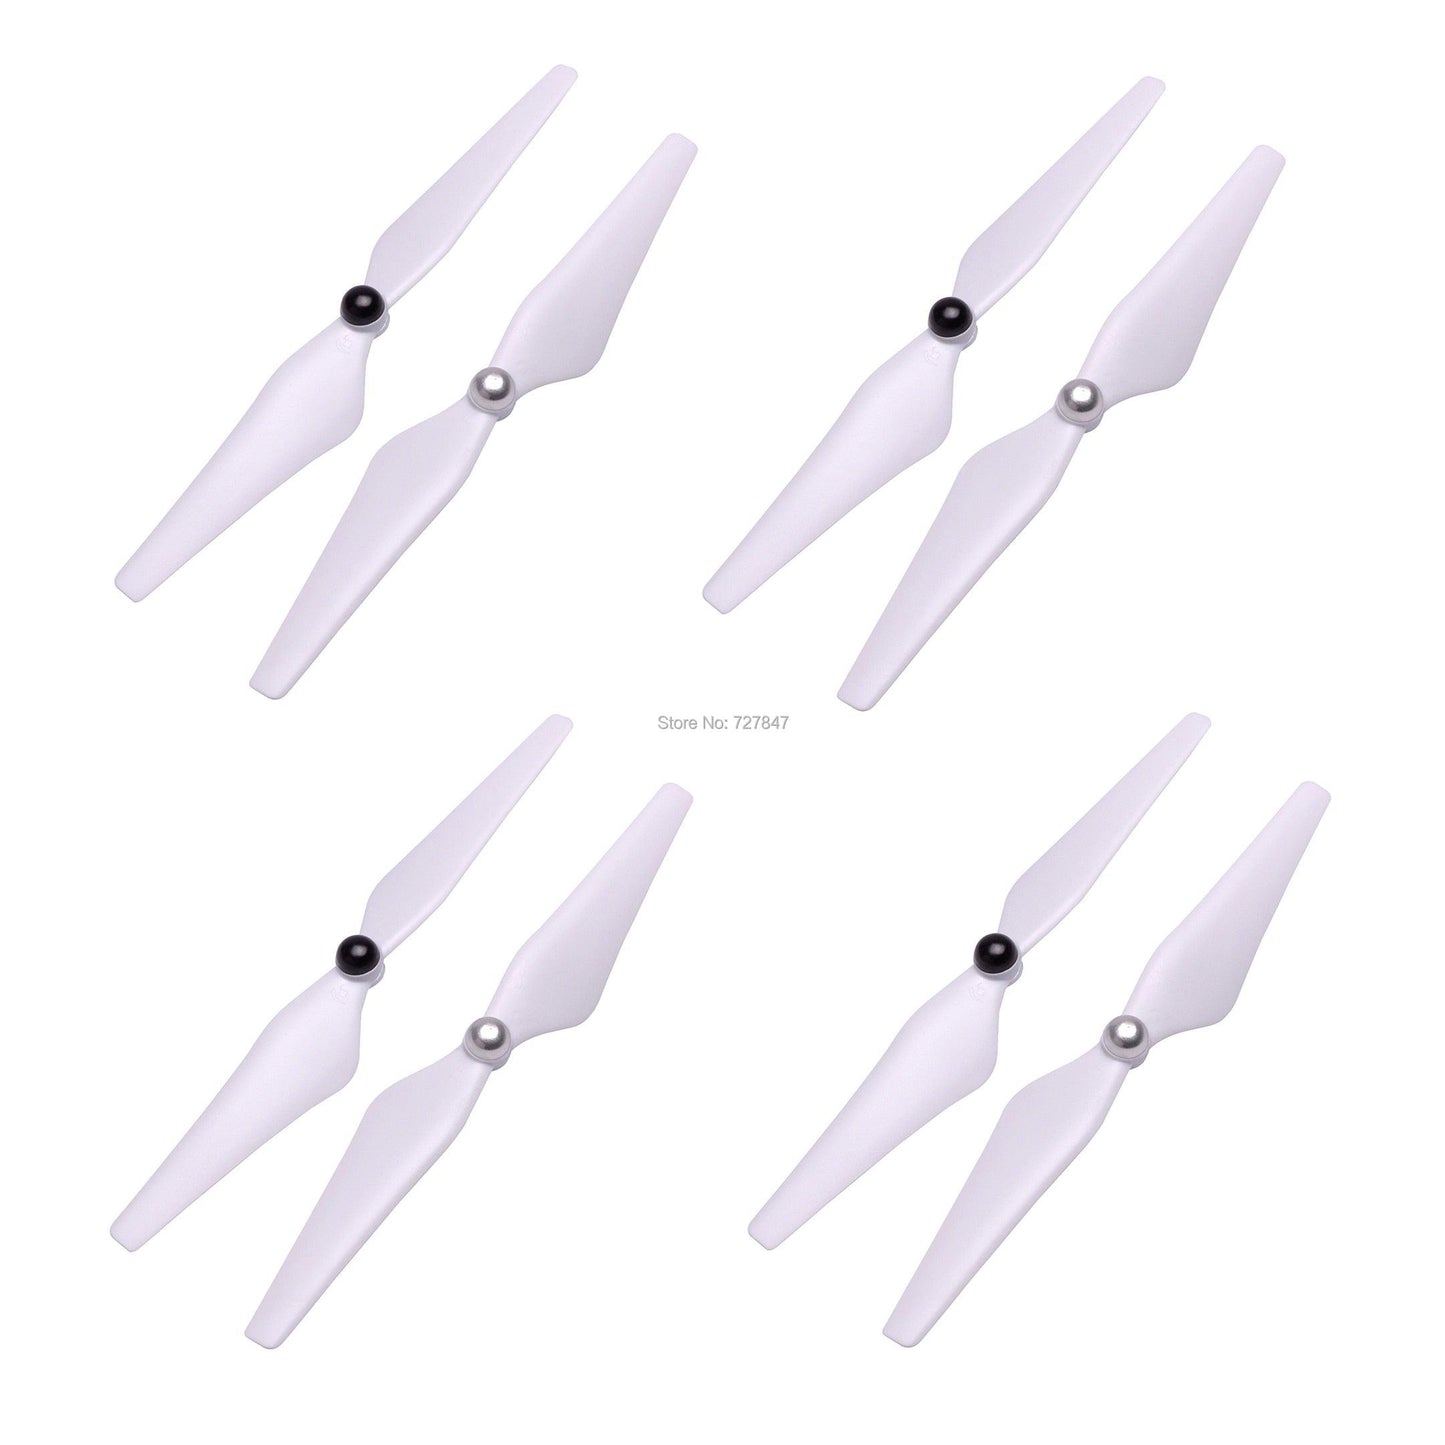 New upgrade 9450 Propeller - 4Pairs 9*4.5 Highly Efficient Self-locking Propeller Prop CW/CCW for Phantom2 Vision - RCDrone